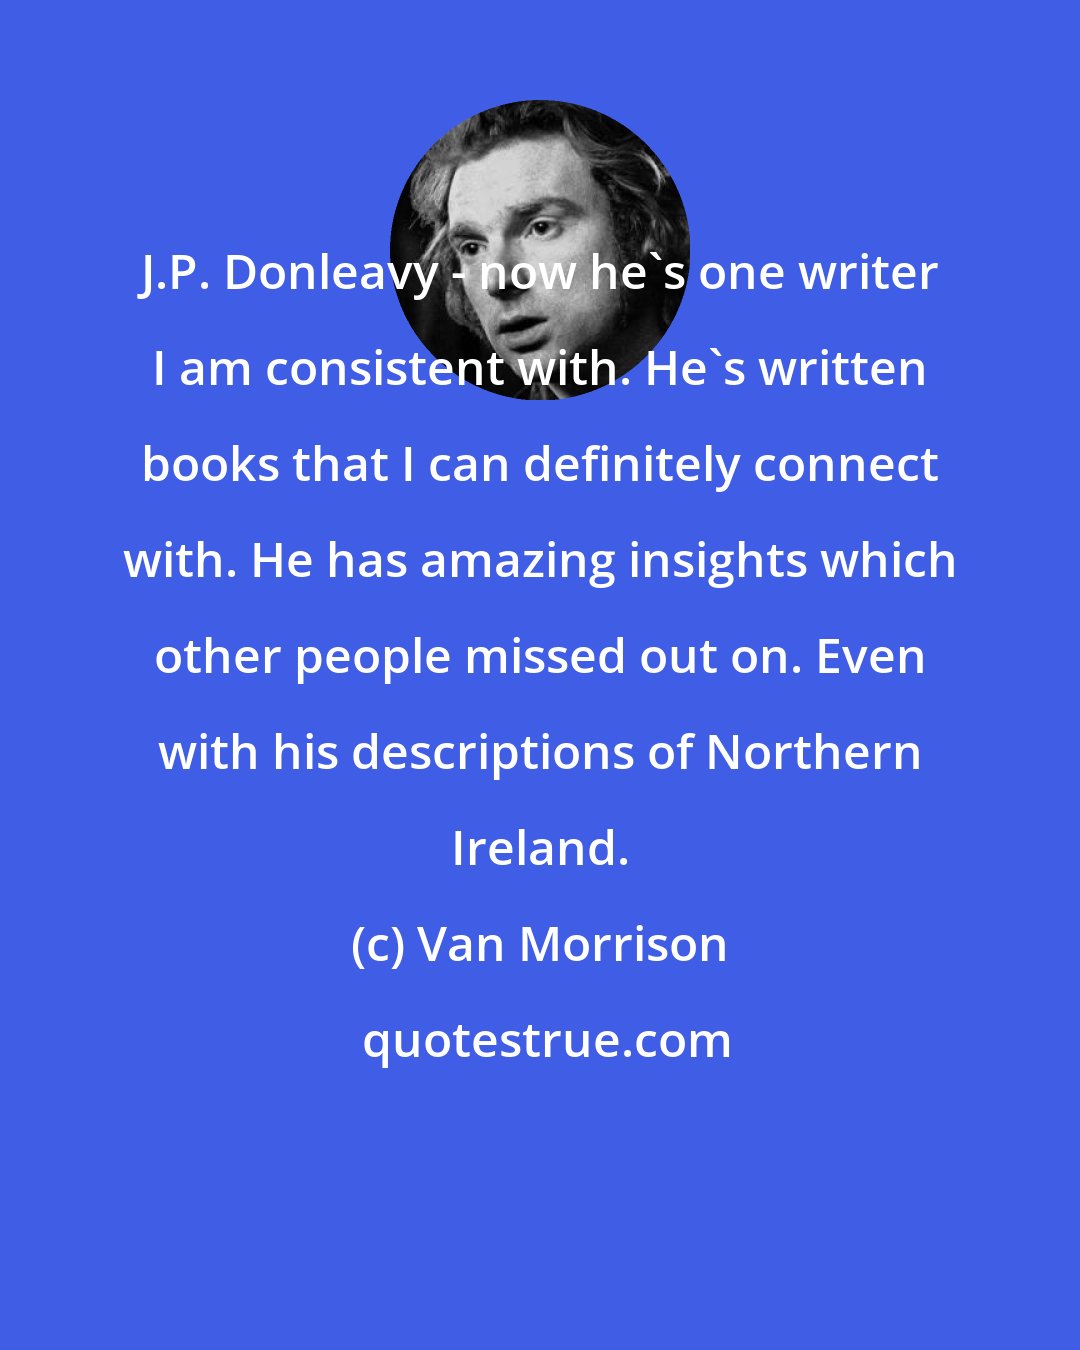 Van Morrison: J.P. Donleavy - now he's one writer I am consistent with. He's written books that I can definitely connect with. He has amazing insights which other people missed out on. Even with his descriptions of Northern Ireland.